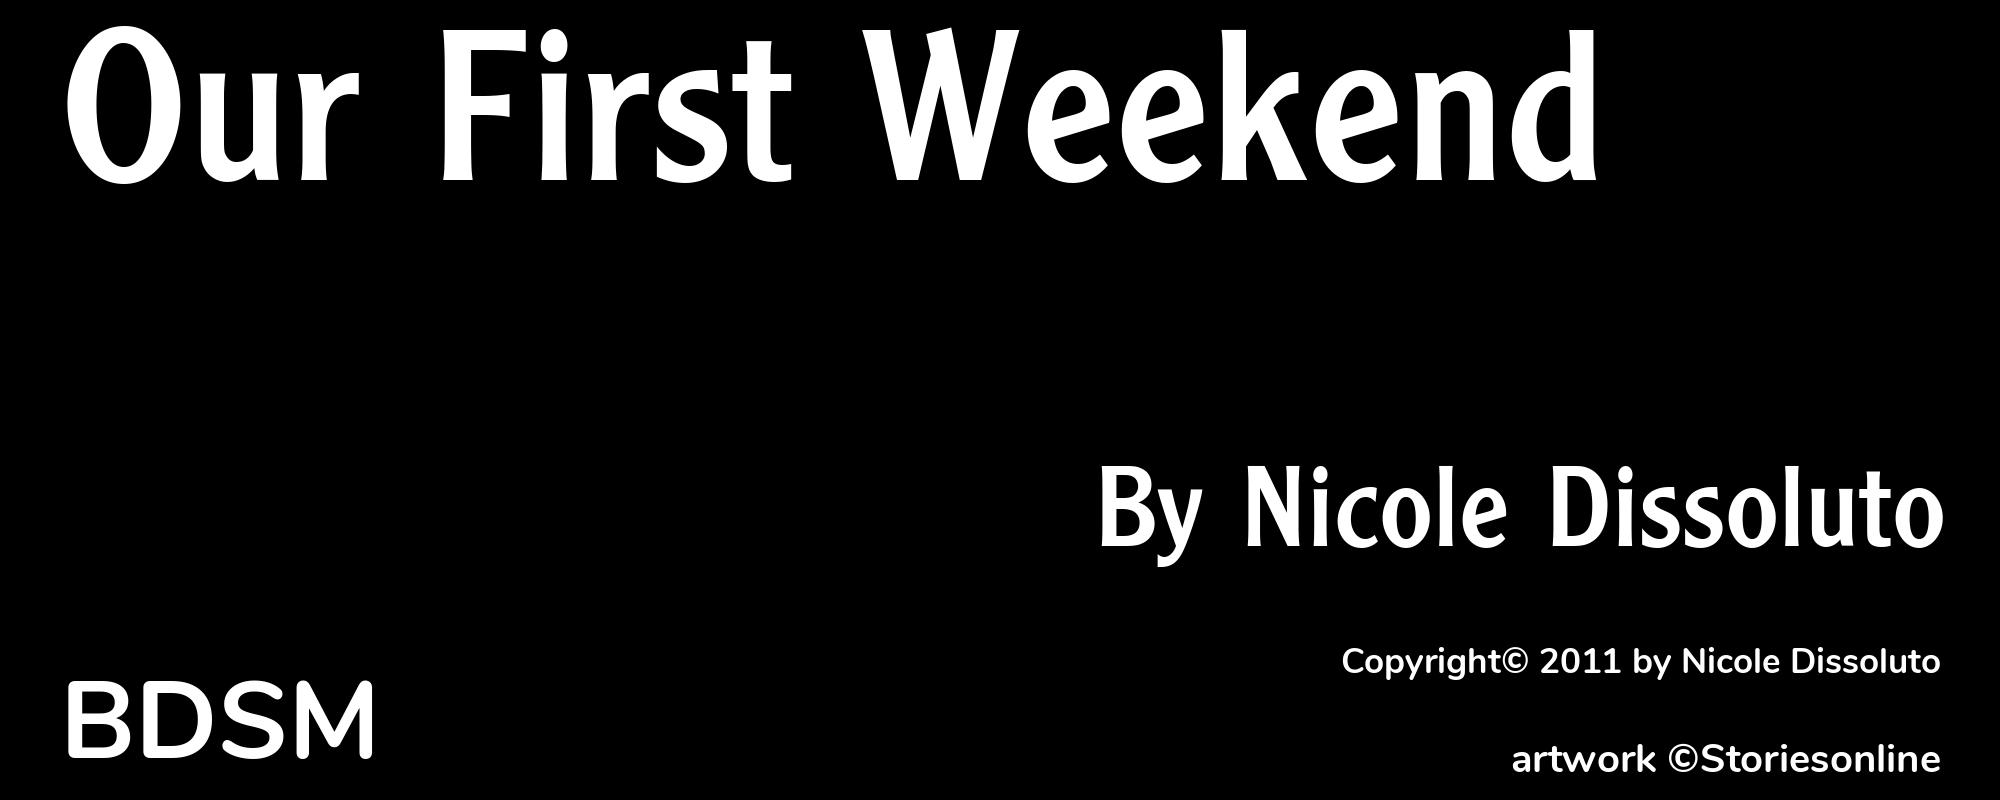 Our First Weekend - Cover